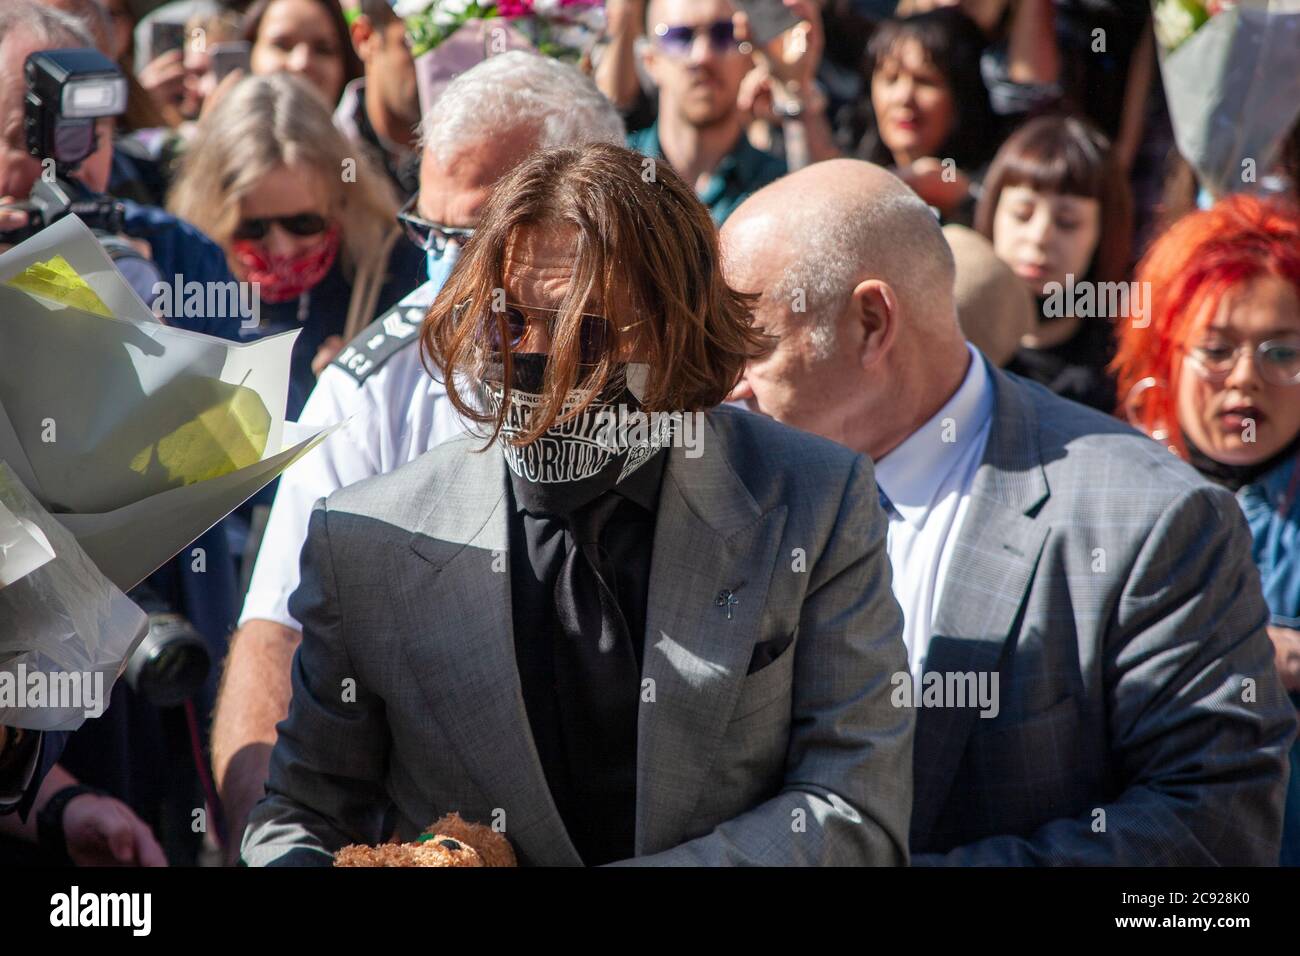 London, UK. 28th July 2020. Hollywood actor and musician, Johnny Depp, arrives at the high court on day 16 of his libel trial against The Sun's publishers NGN. Credit: Neil Atkinson/Alamy Live News Stock Photo